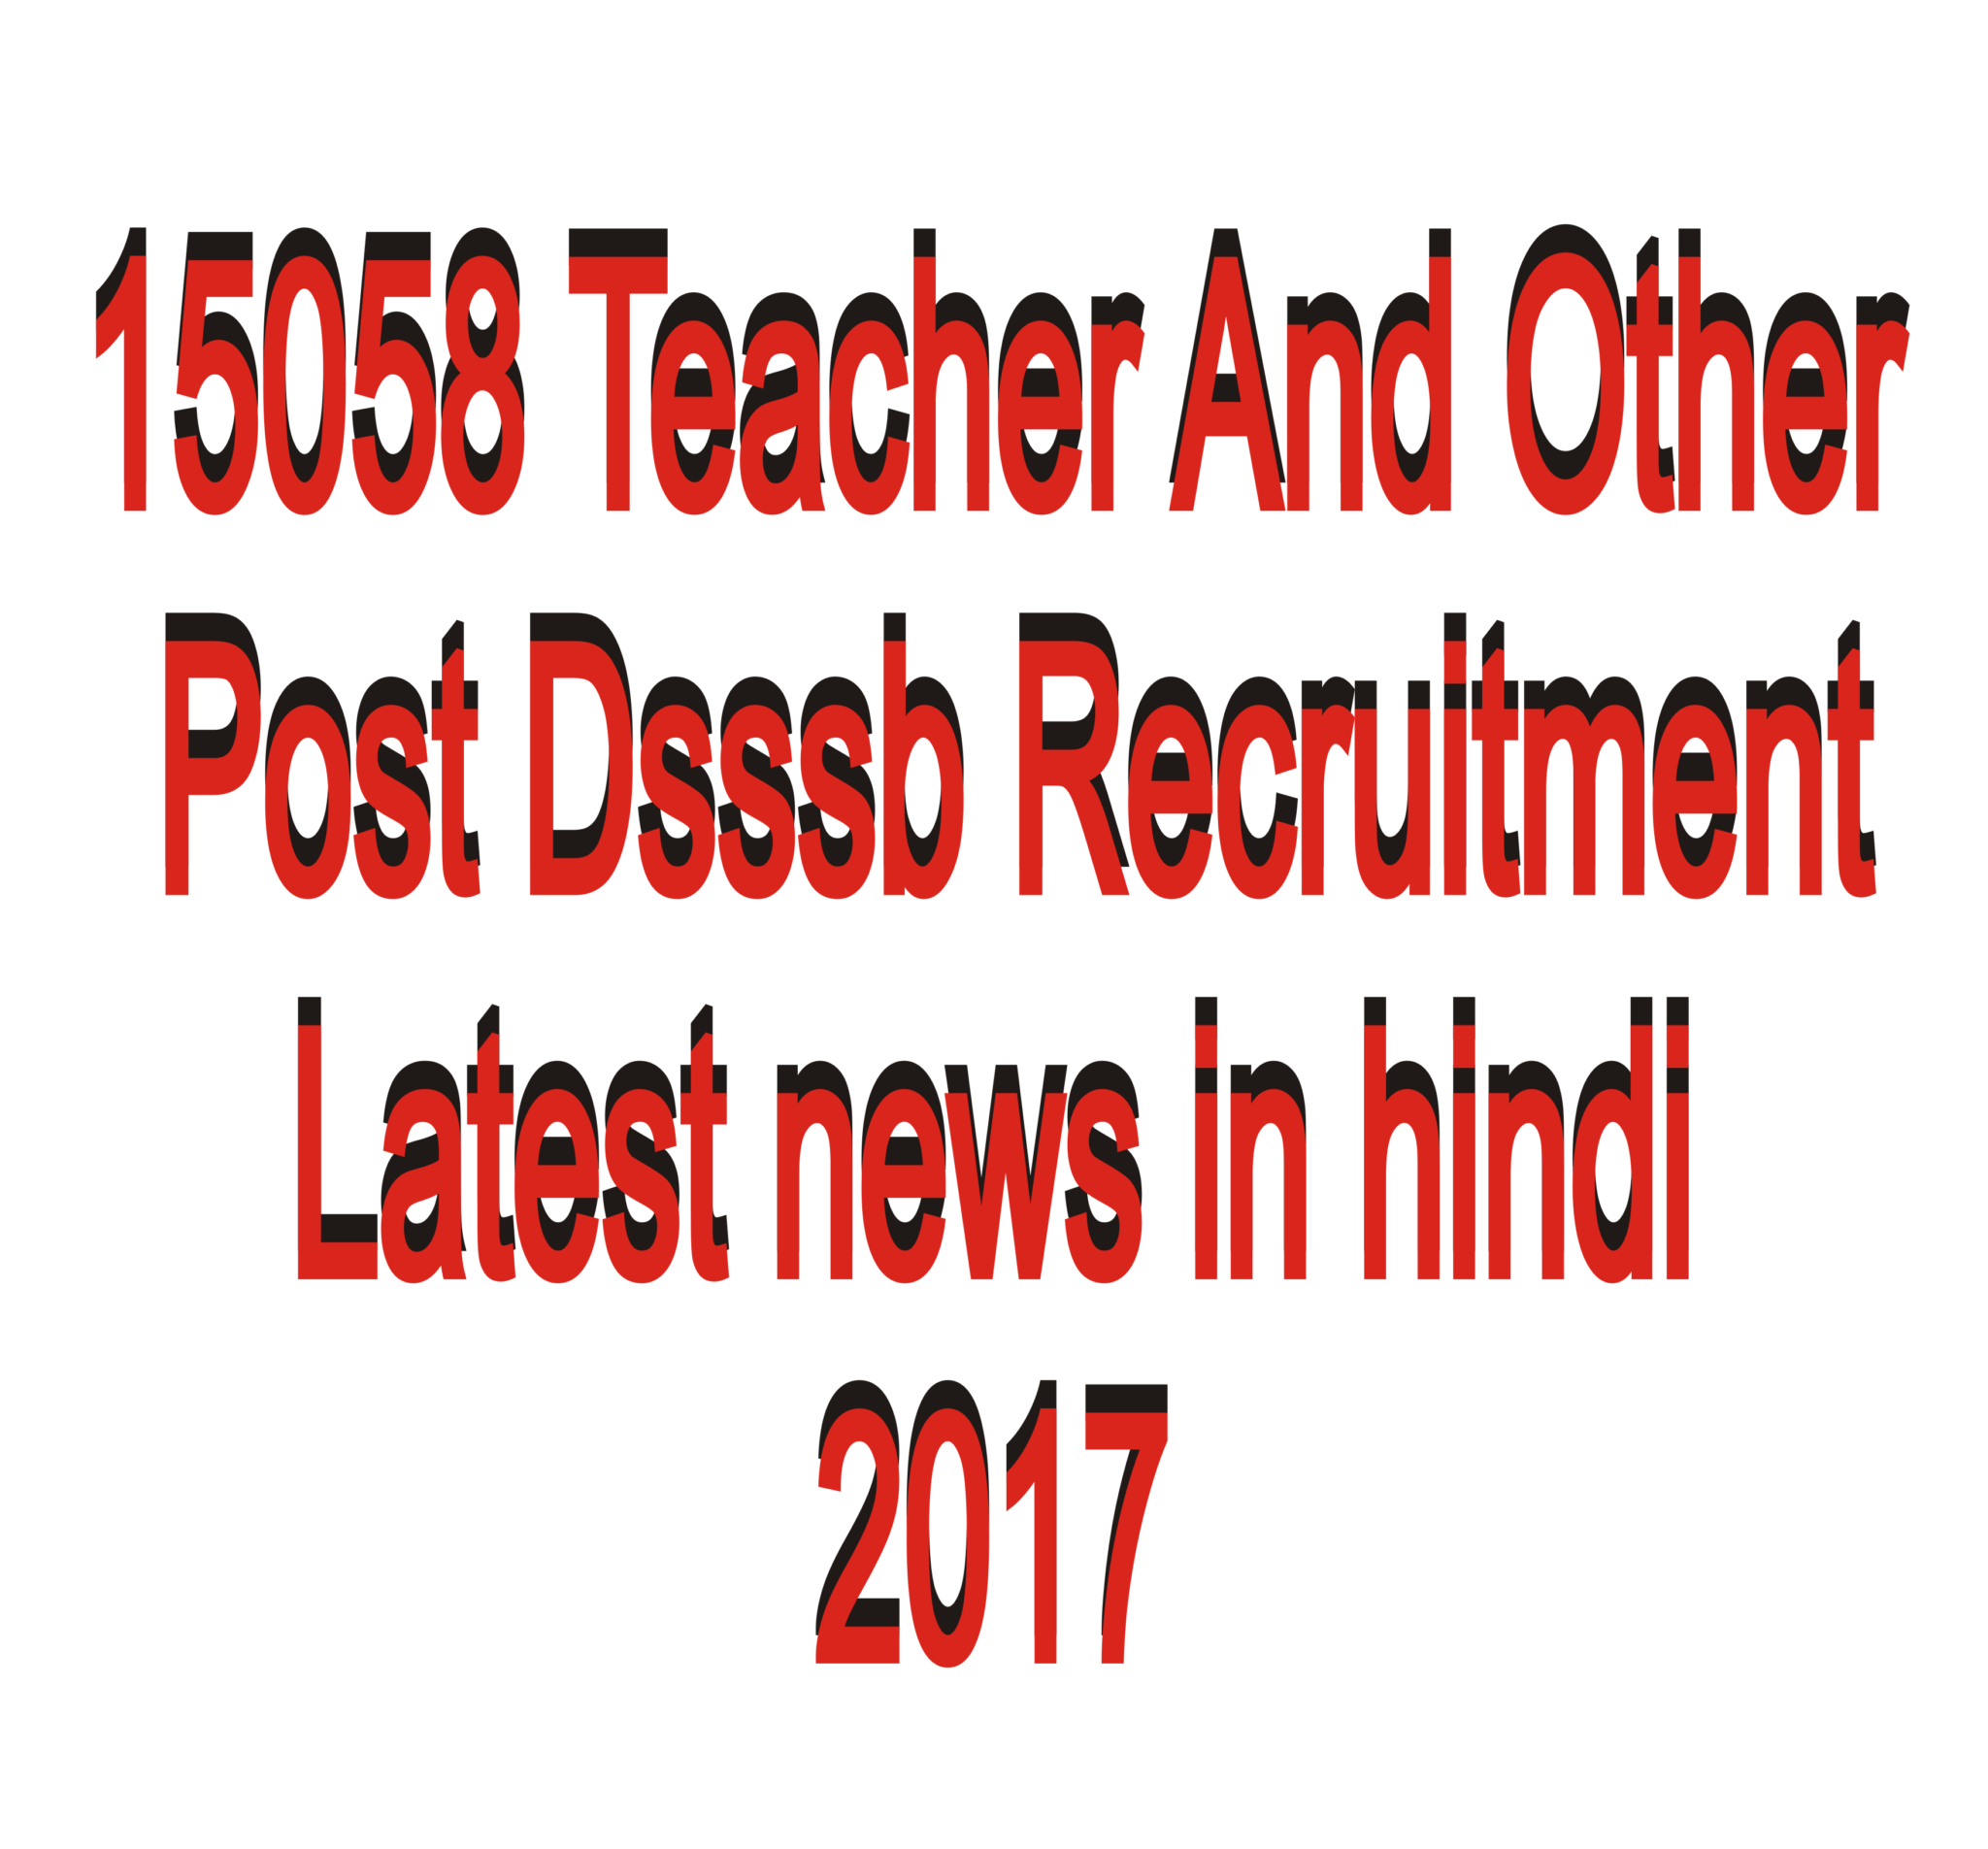 15058 Teacher And Other Post Dsssb Recruitment Latest news in hindi